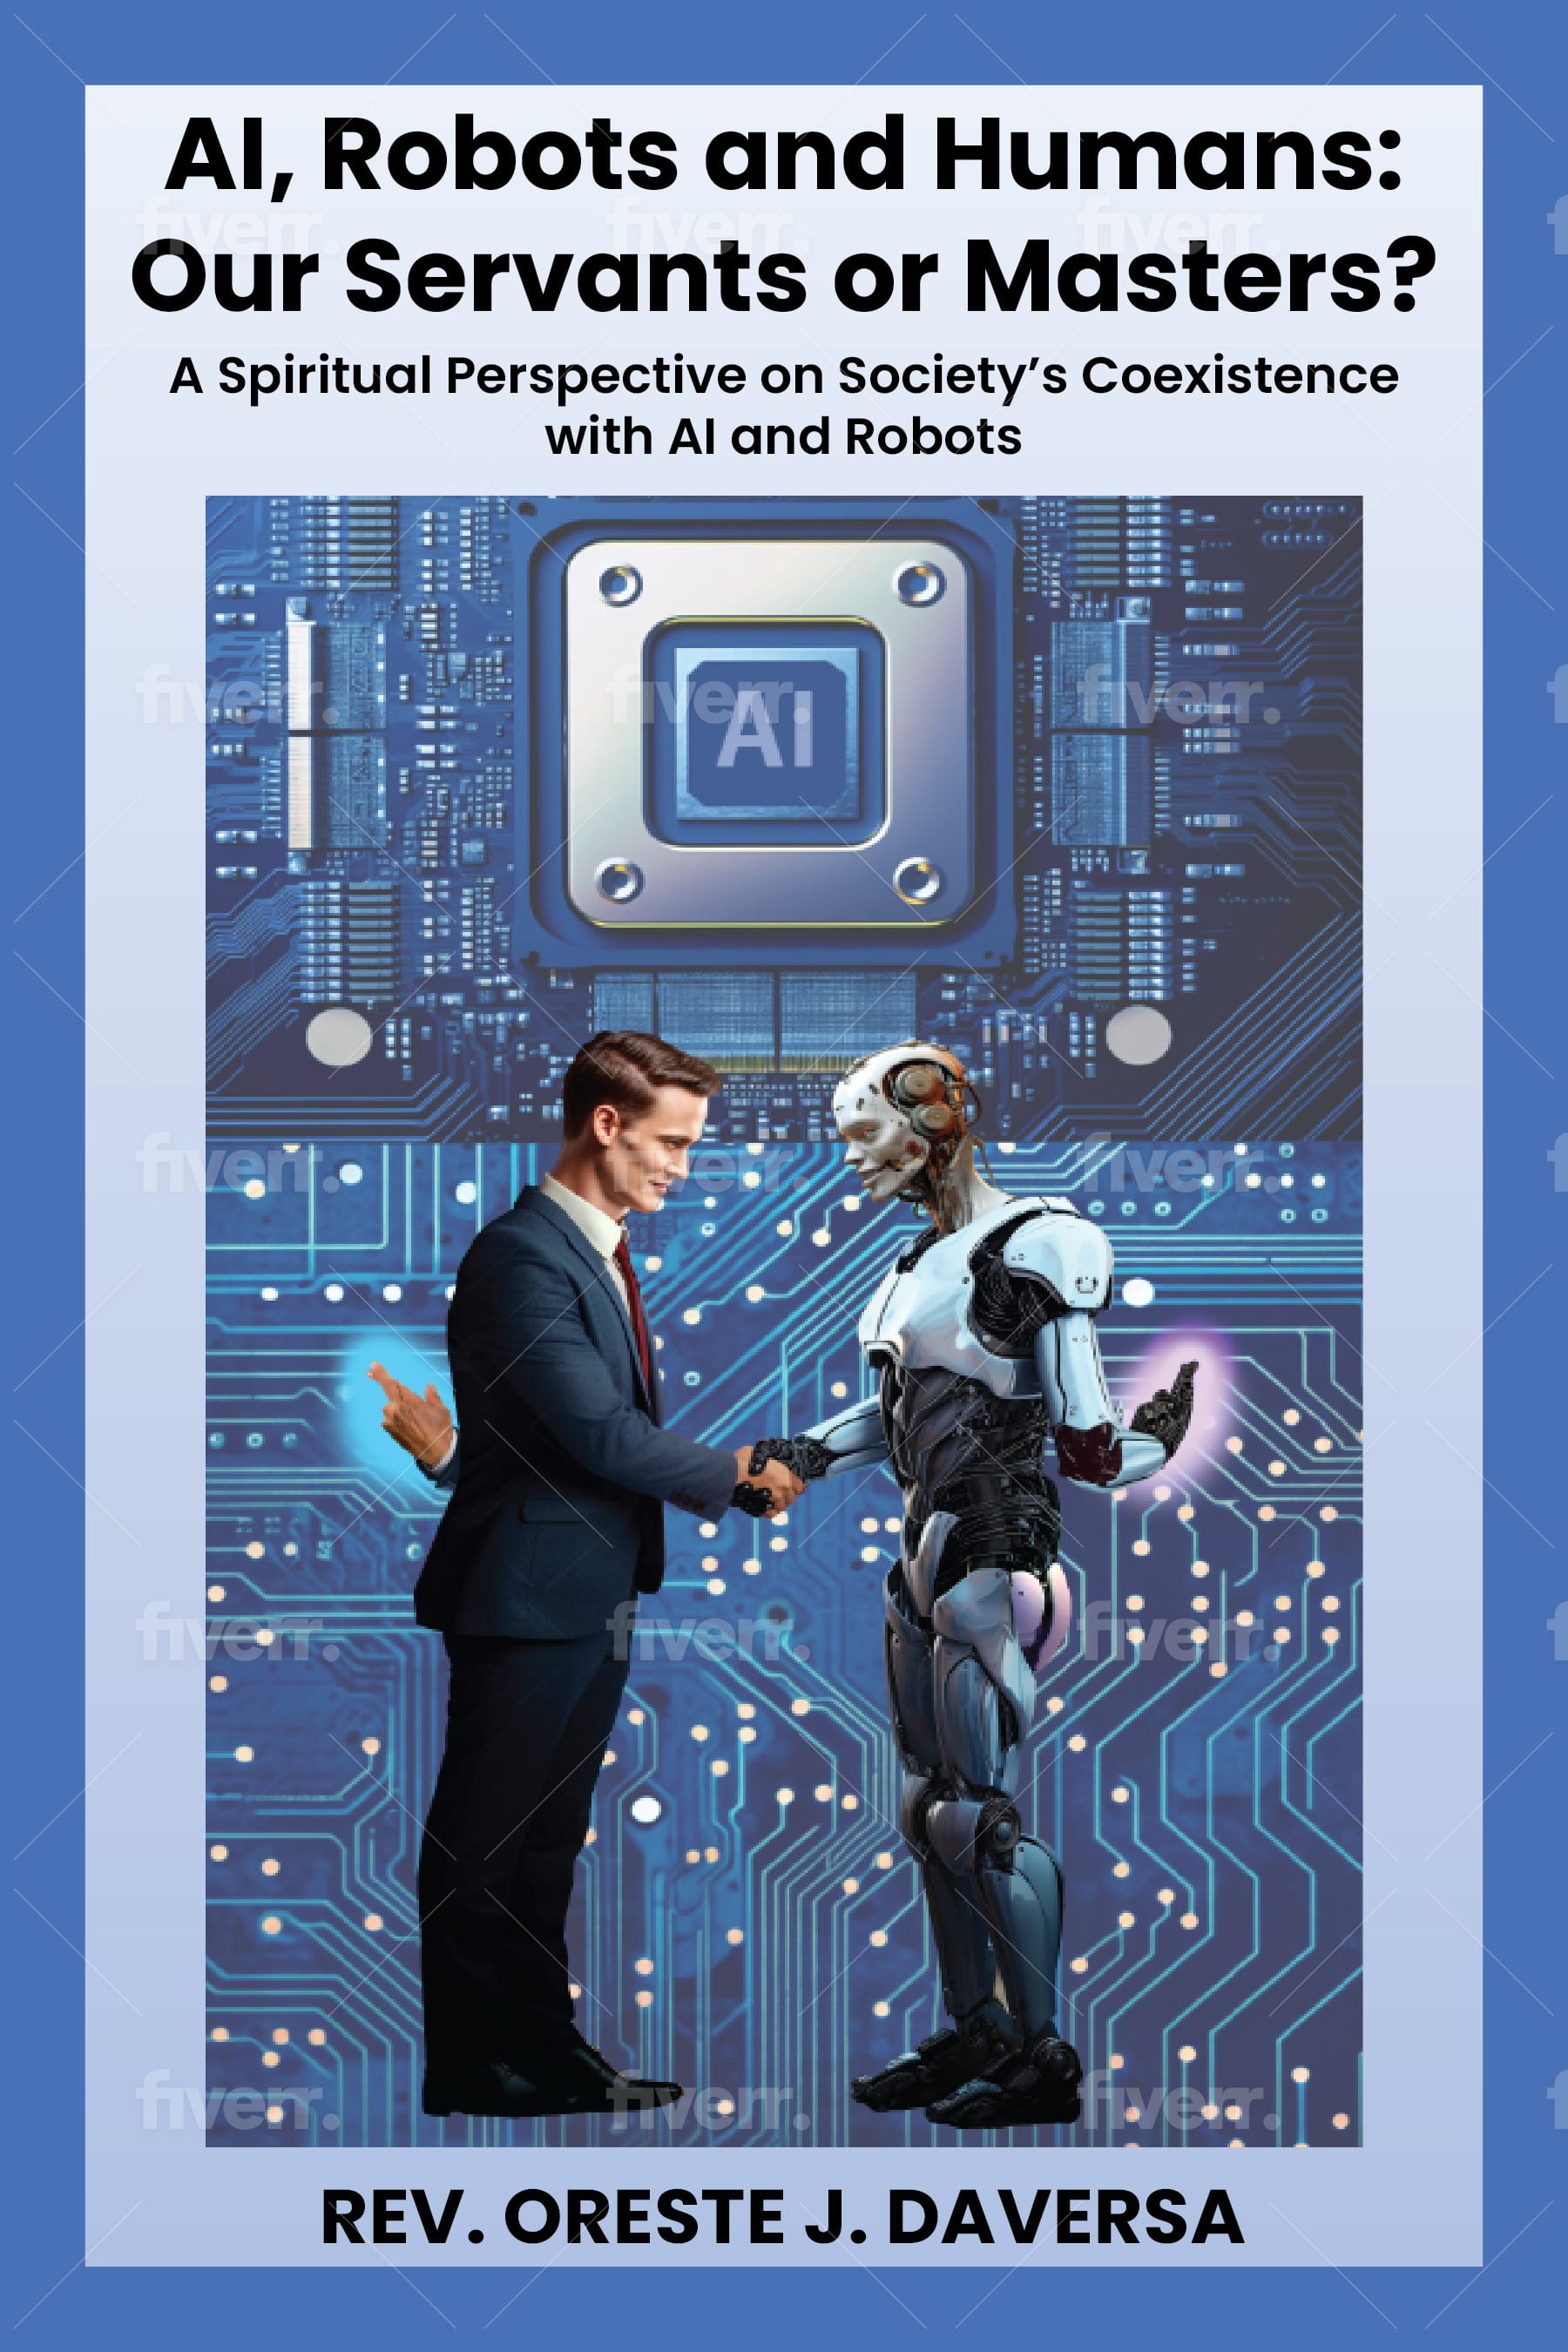 New Book Explores the Complex Relationship Between AI, Robots and Humanity